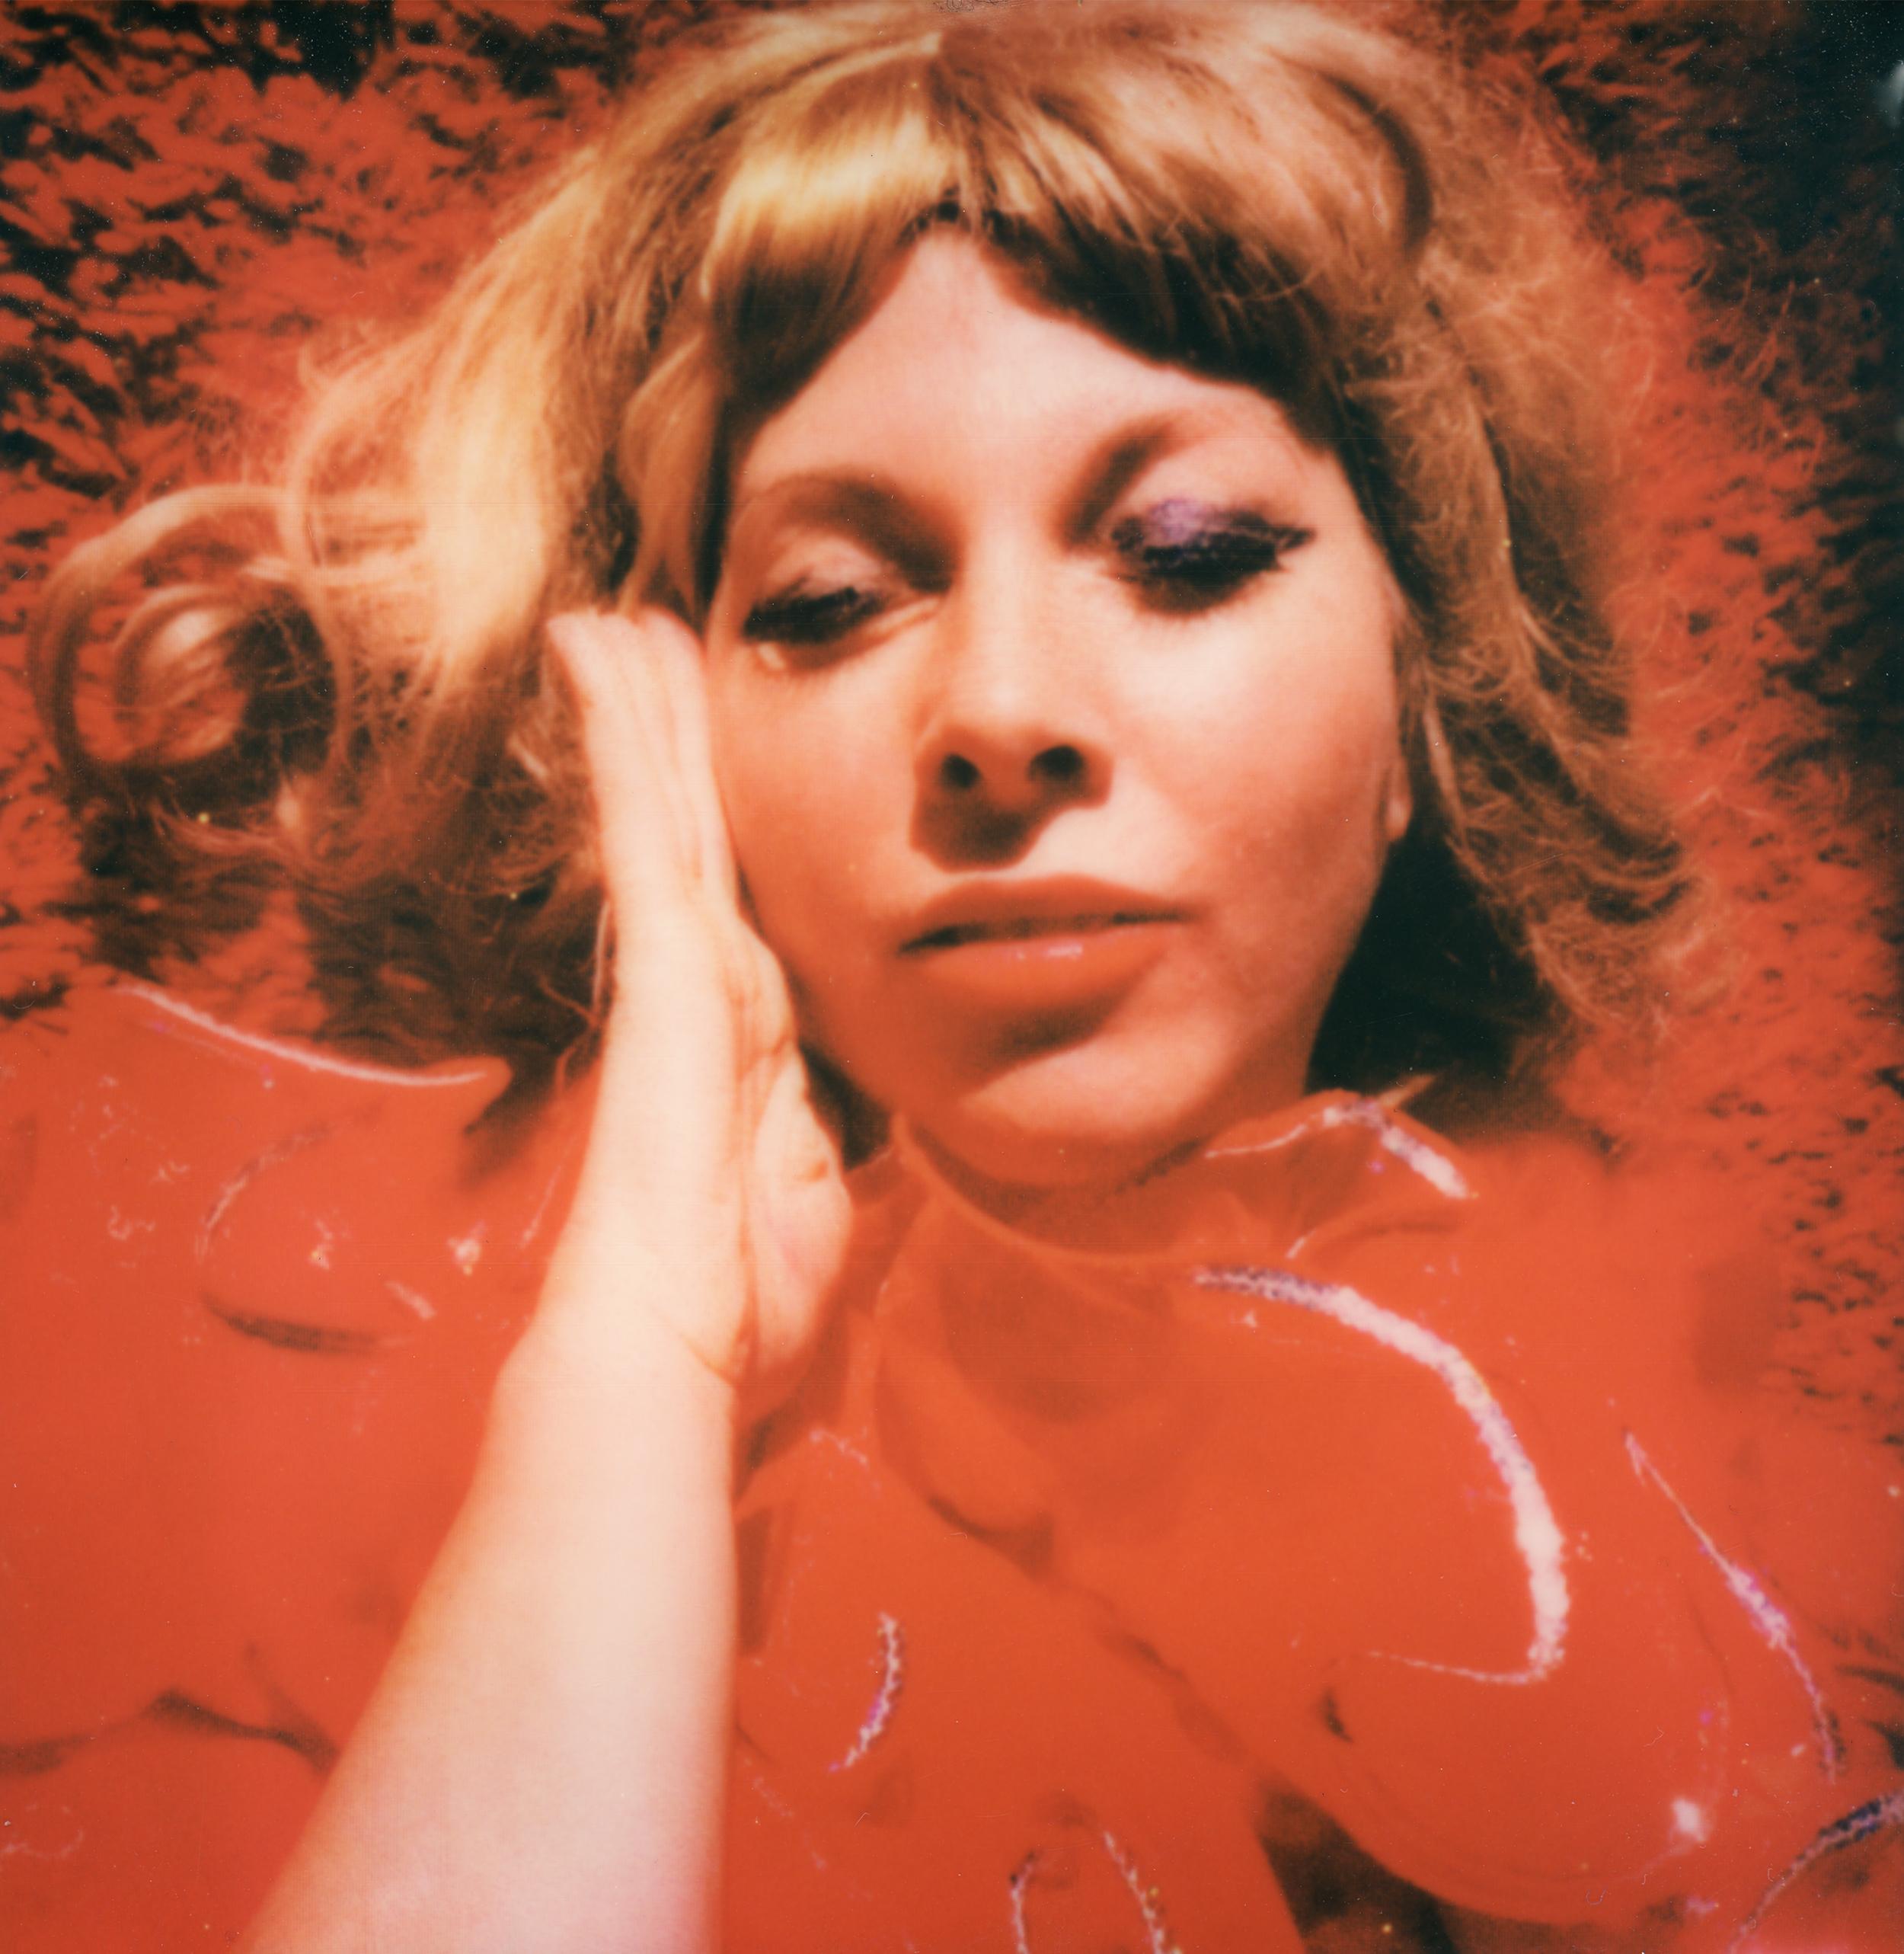 Clare Marie Bailey Color Photograph - Painted Red - Contemporary, Polaroid, Photograph, Figurative, Portrait